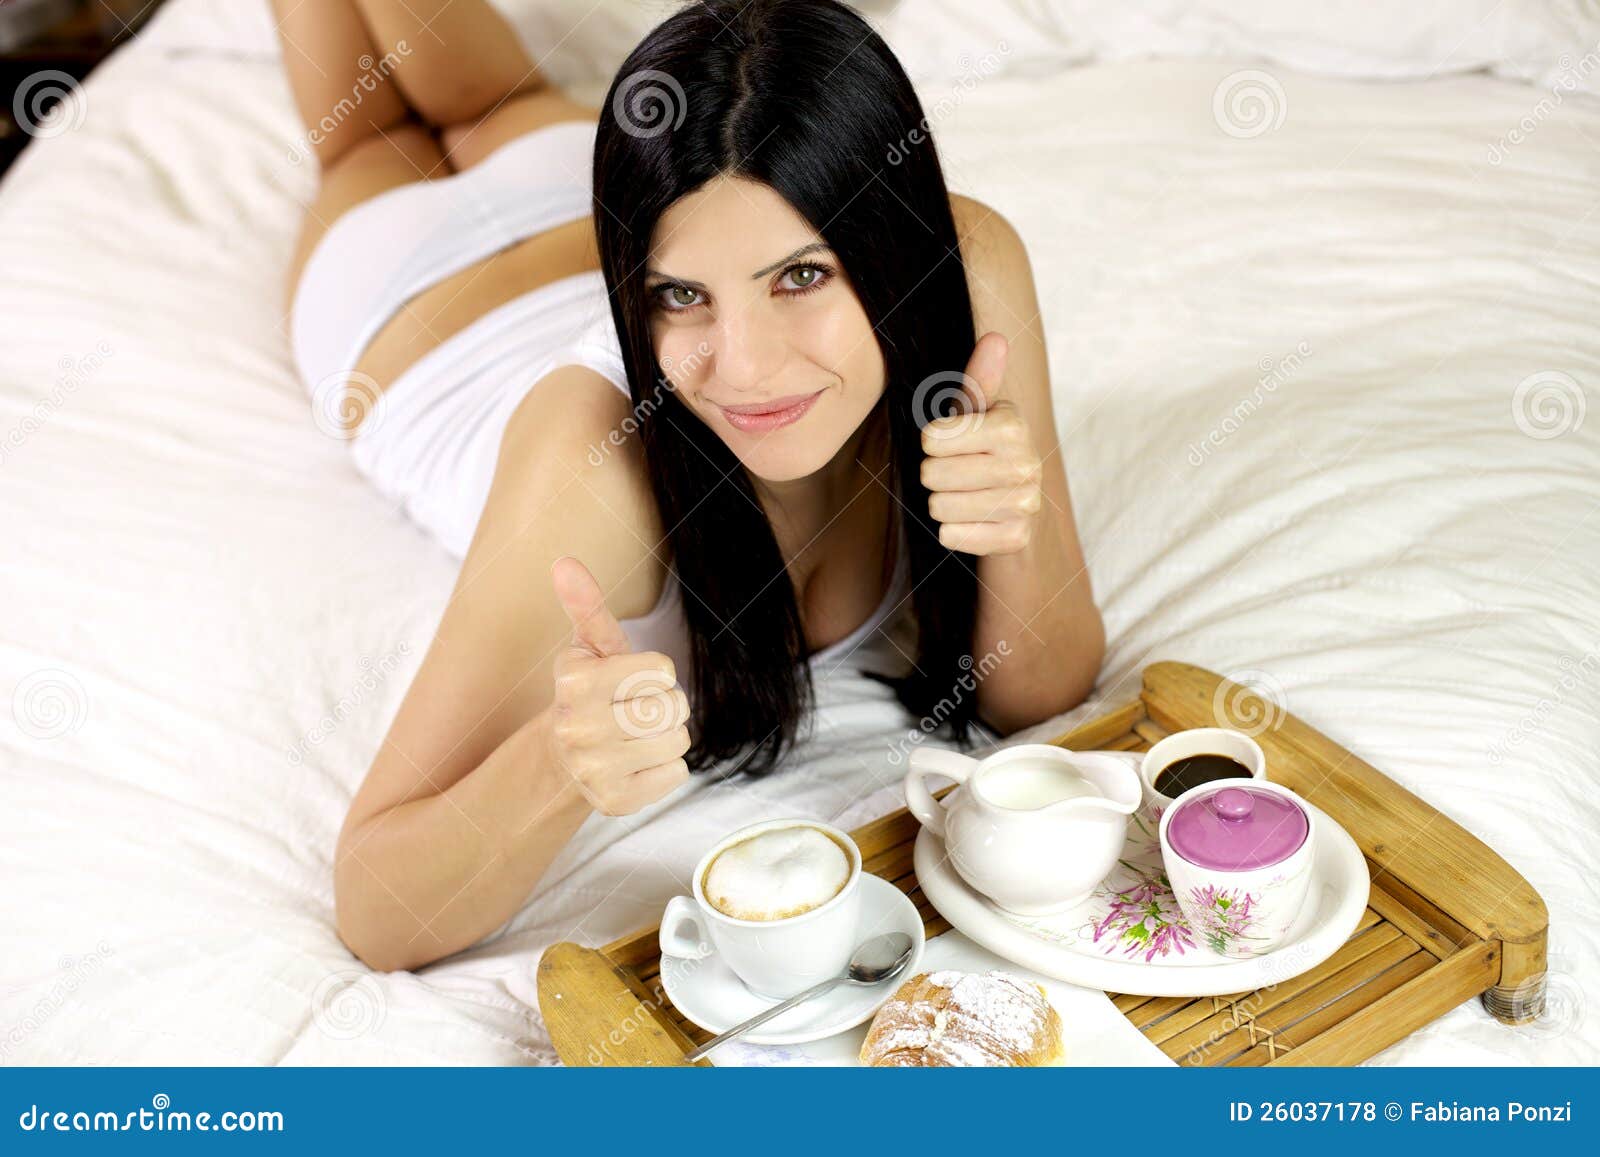 blair verhaeghe recommends breakfast in bed babes pic